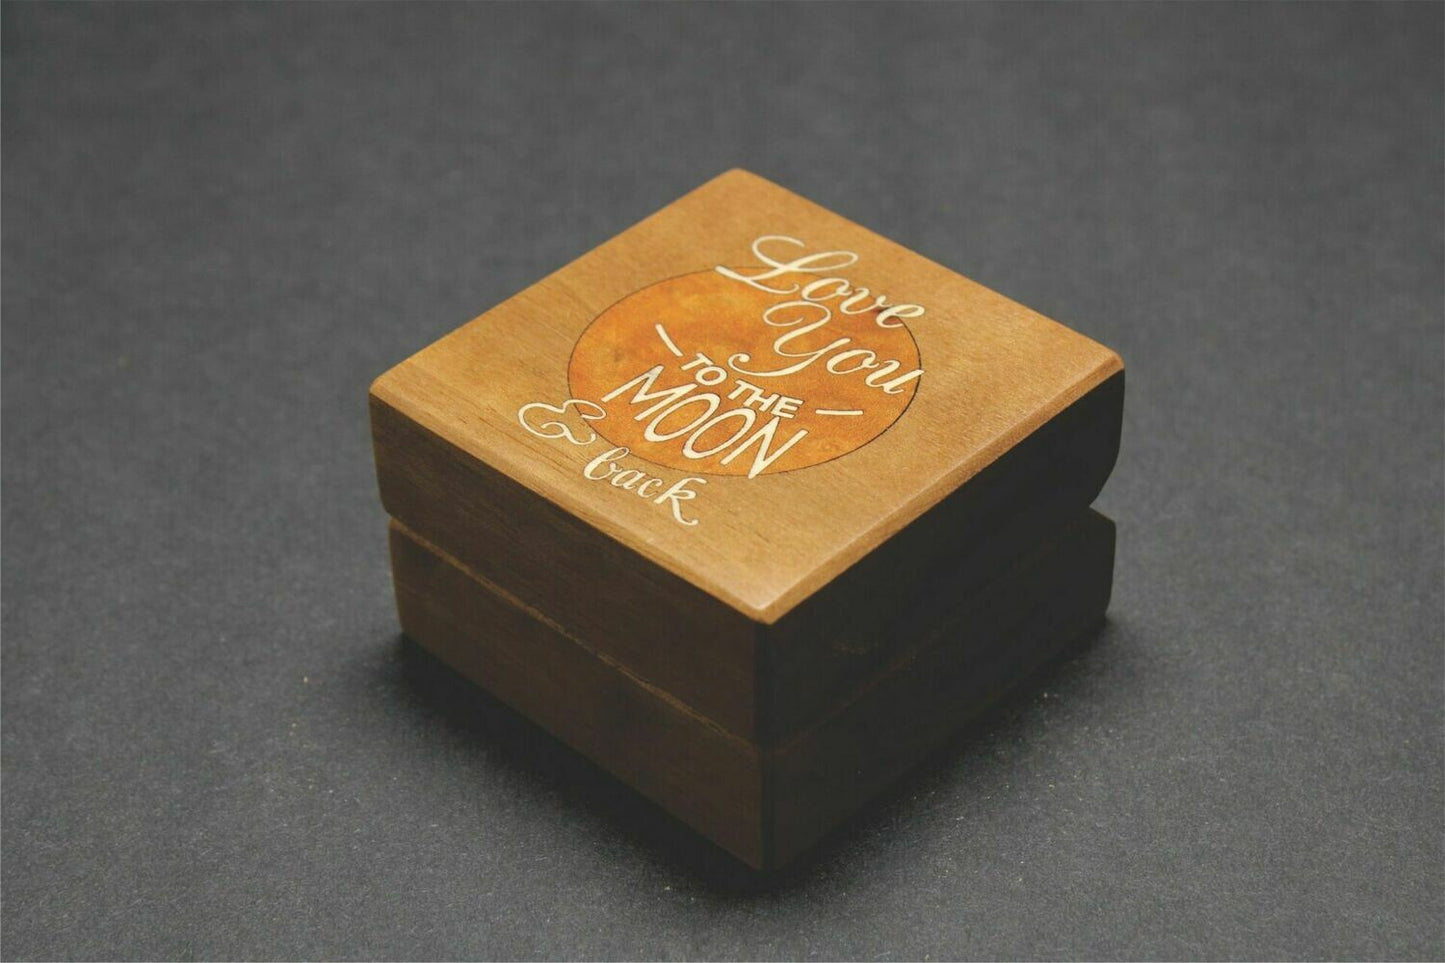 Handcrafted inlaid Walnut Ring Box - "To the Moon and Back" RB-68   Made in the U.S.